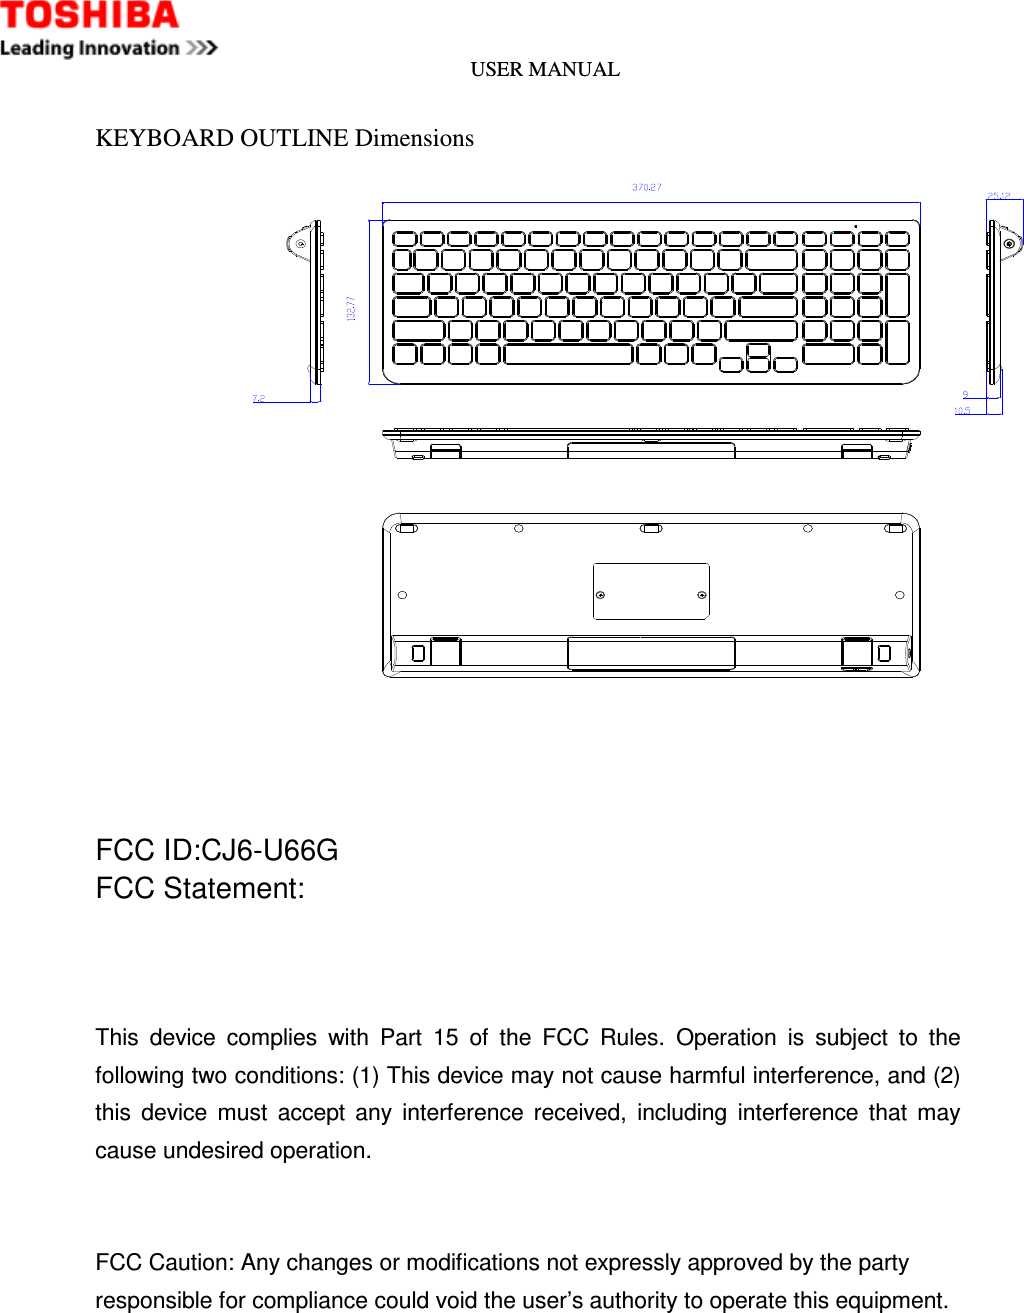 USER MANUAL    KEYBOARD OUTLINE Dimensions     FCC ID:CJ6-U66G FCC Statement:    This  device  complies  with  Part  15  of  the  FCC  Rules.  Operation  is  subject  to  the following two conditions: (1) This device may not cause harmful interference, and (2) this  device  must  accept  any  interference  received,  including  interference  that  may cause undesired operation.   FCC Caution: Any changes or modifications not expressly approved by the party   responsible for compliance could void the user’s authority to operate this equipment.    